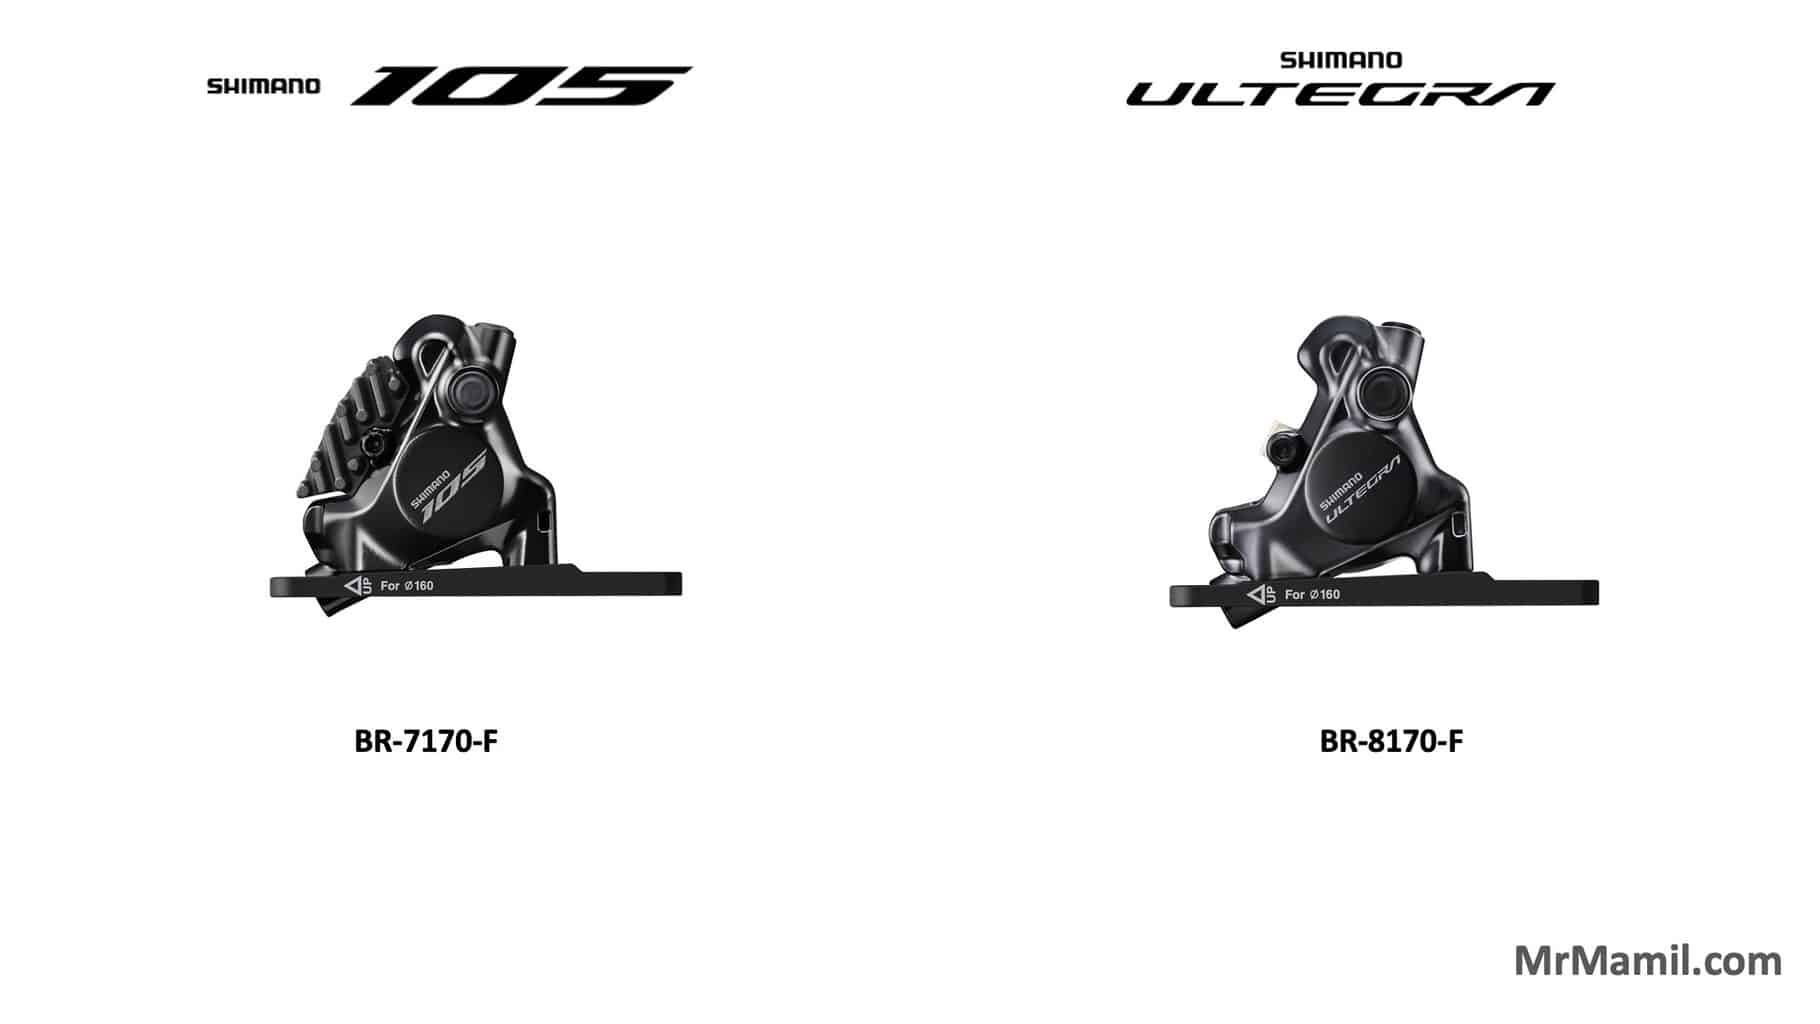 Side-by-side comparison of Shimano disc brake calipers On the left, a Shimano 105 caliper labeled BR-7170-F. On the right, a Shimano Ultegra caliper labeled BR-8170-F.